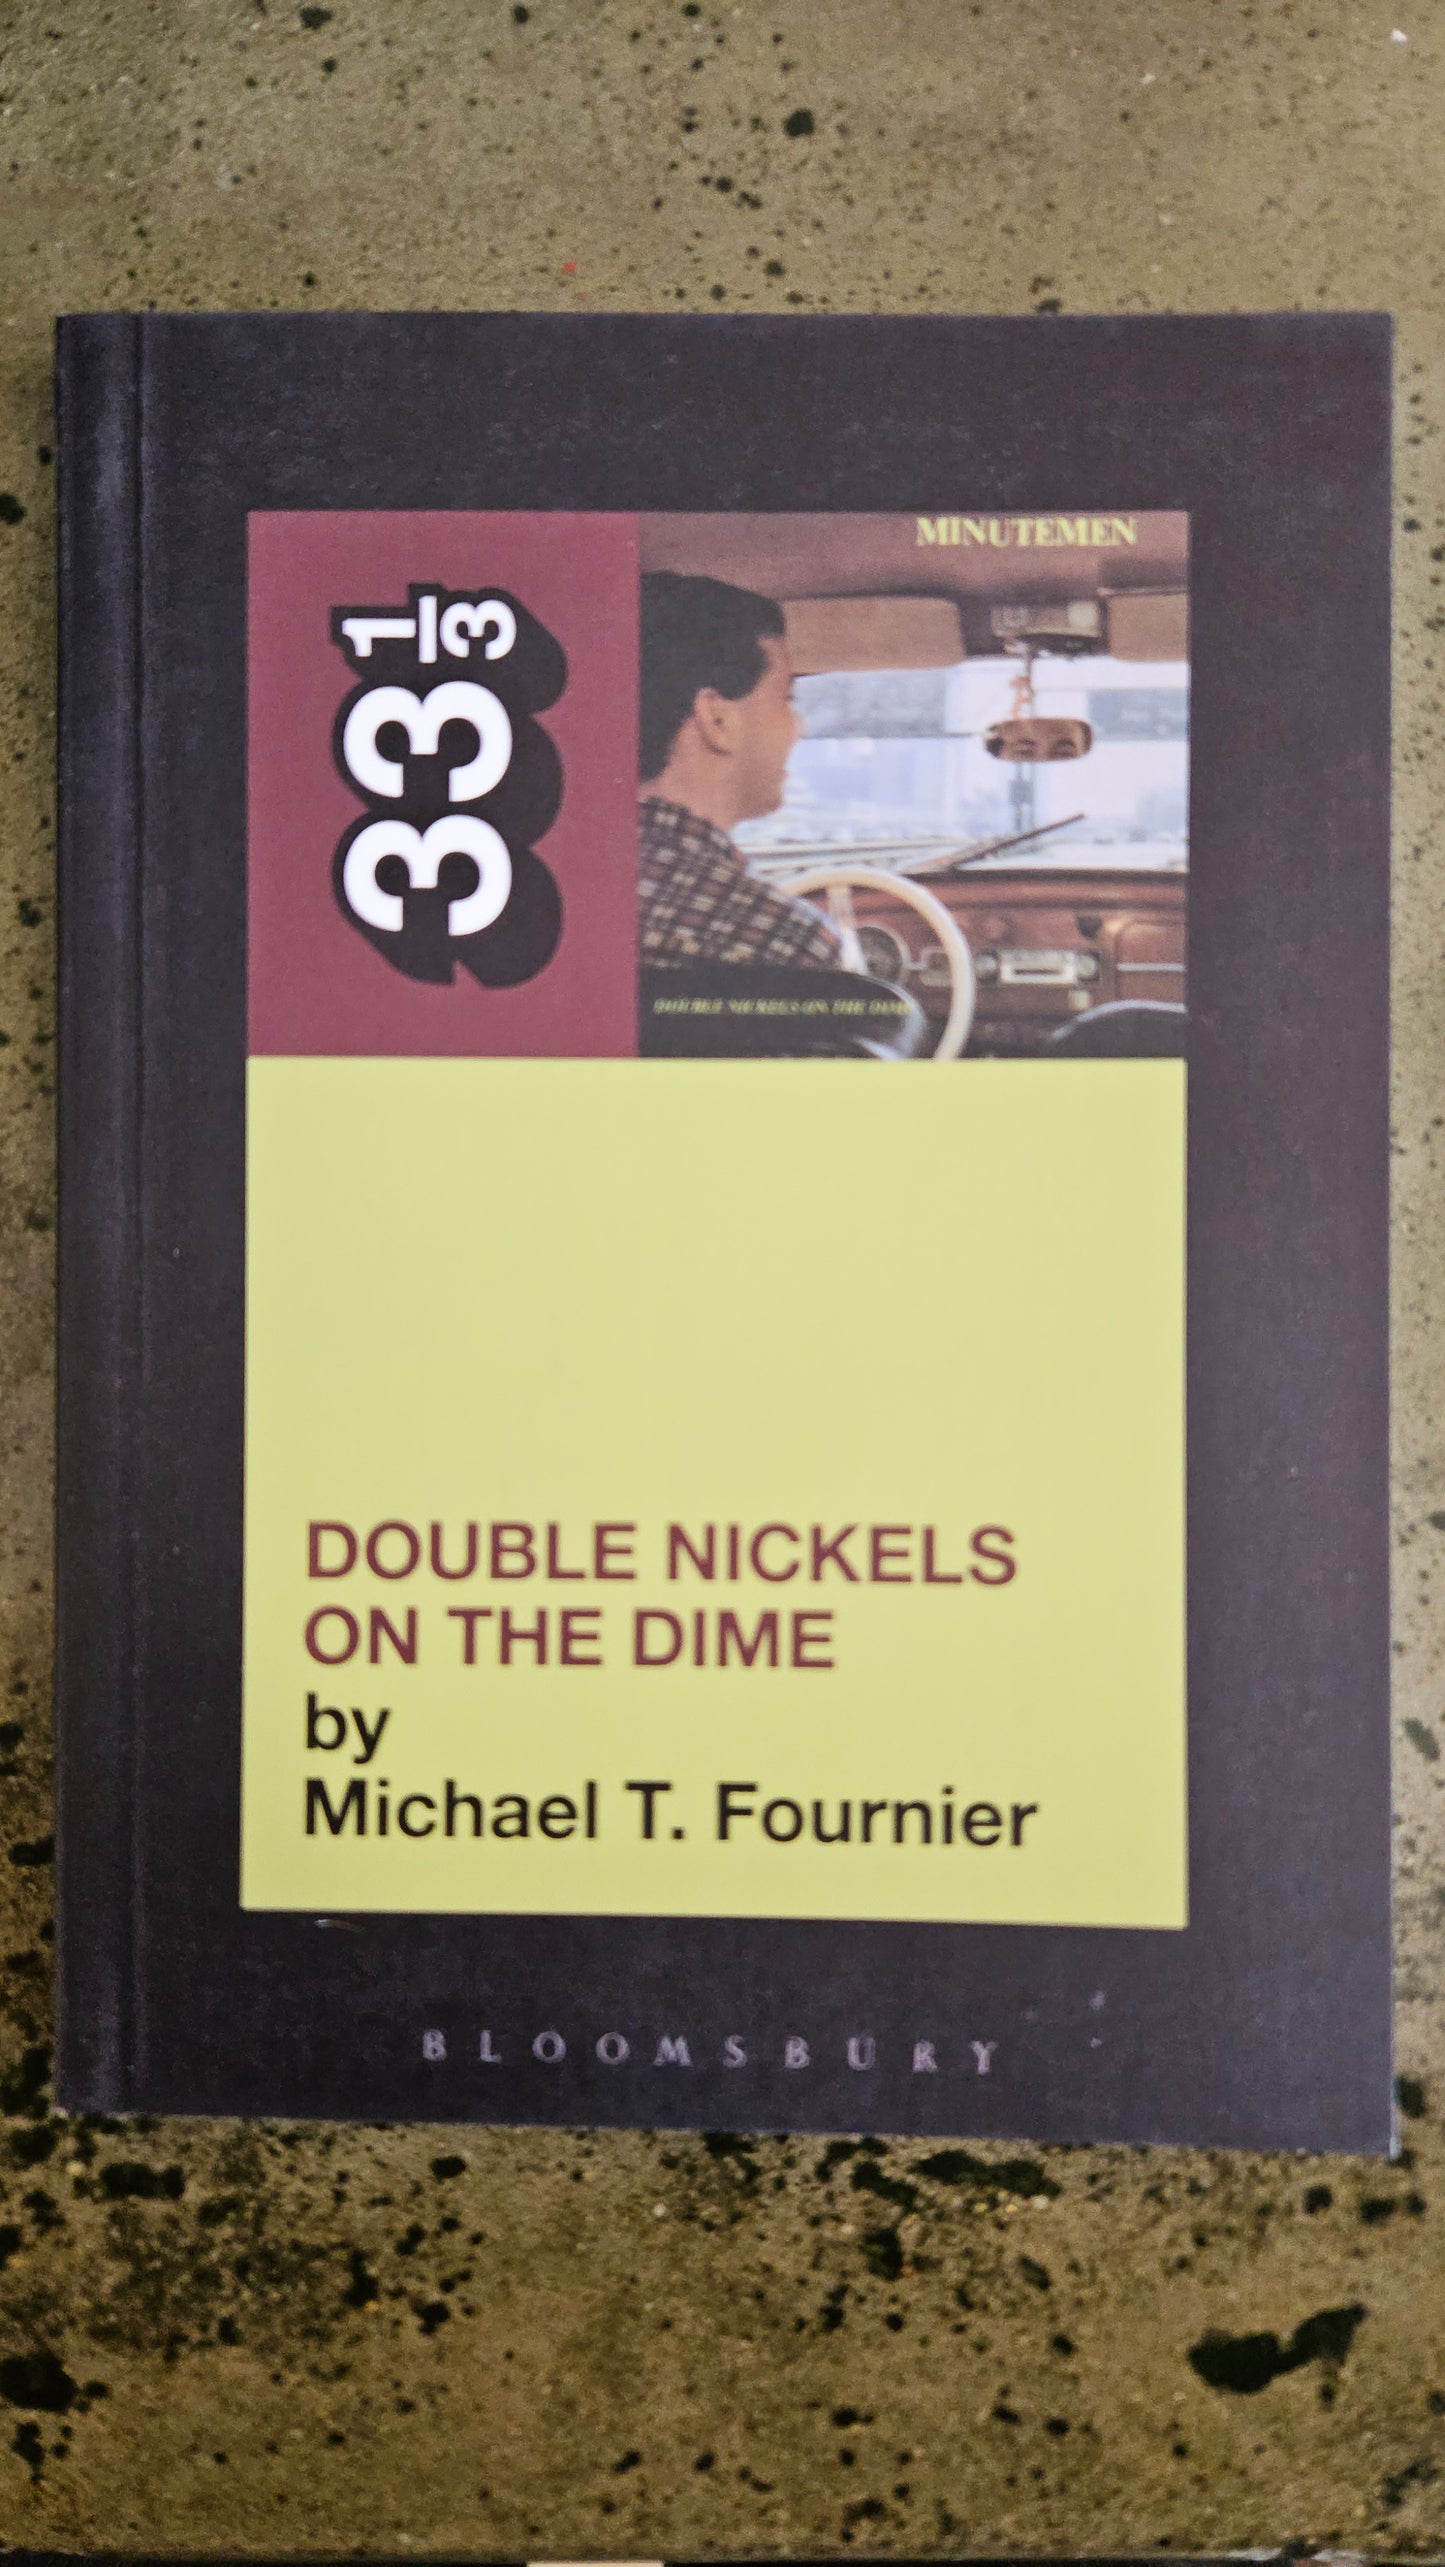 Michael Fournier - 33 1/3 Double Nickels on the Dime